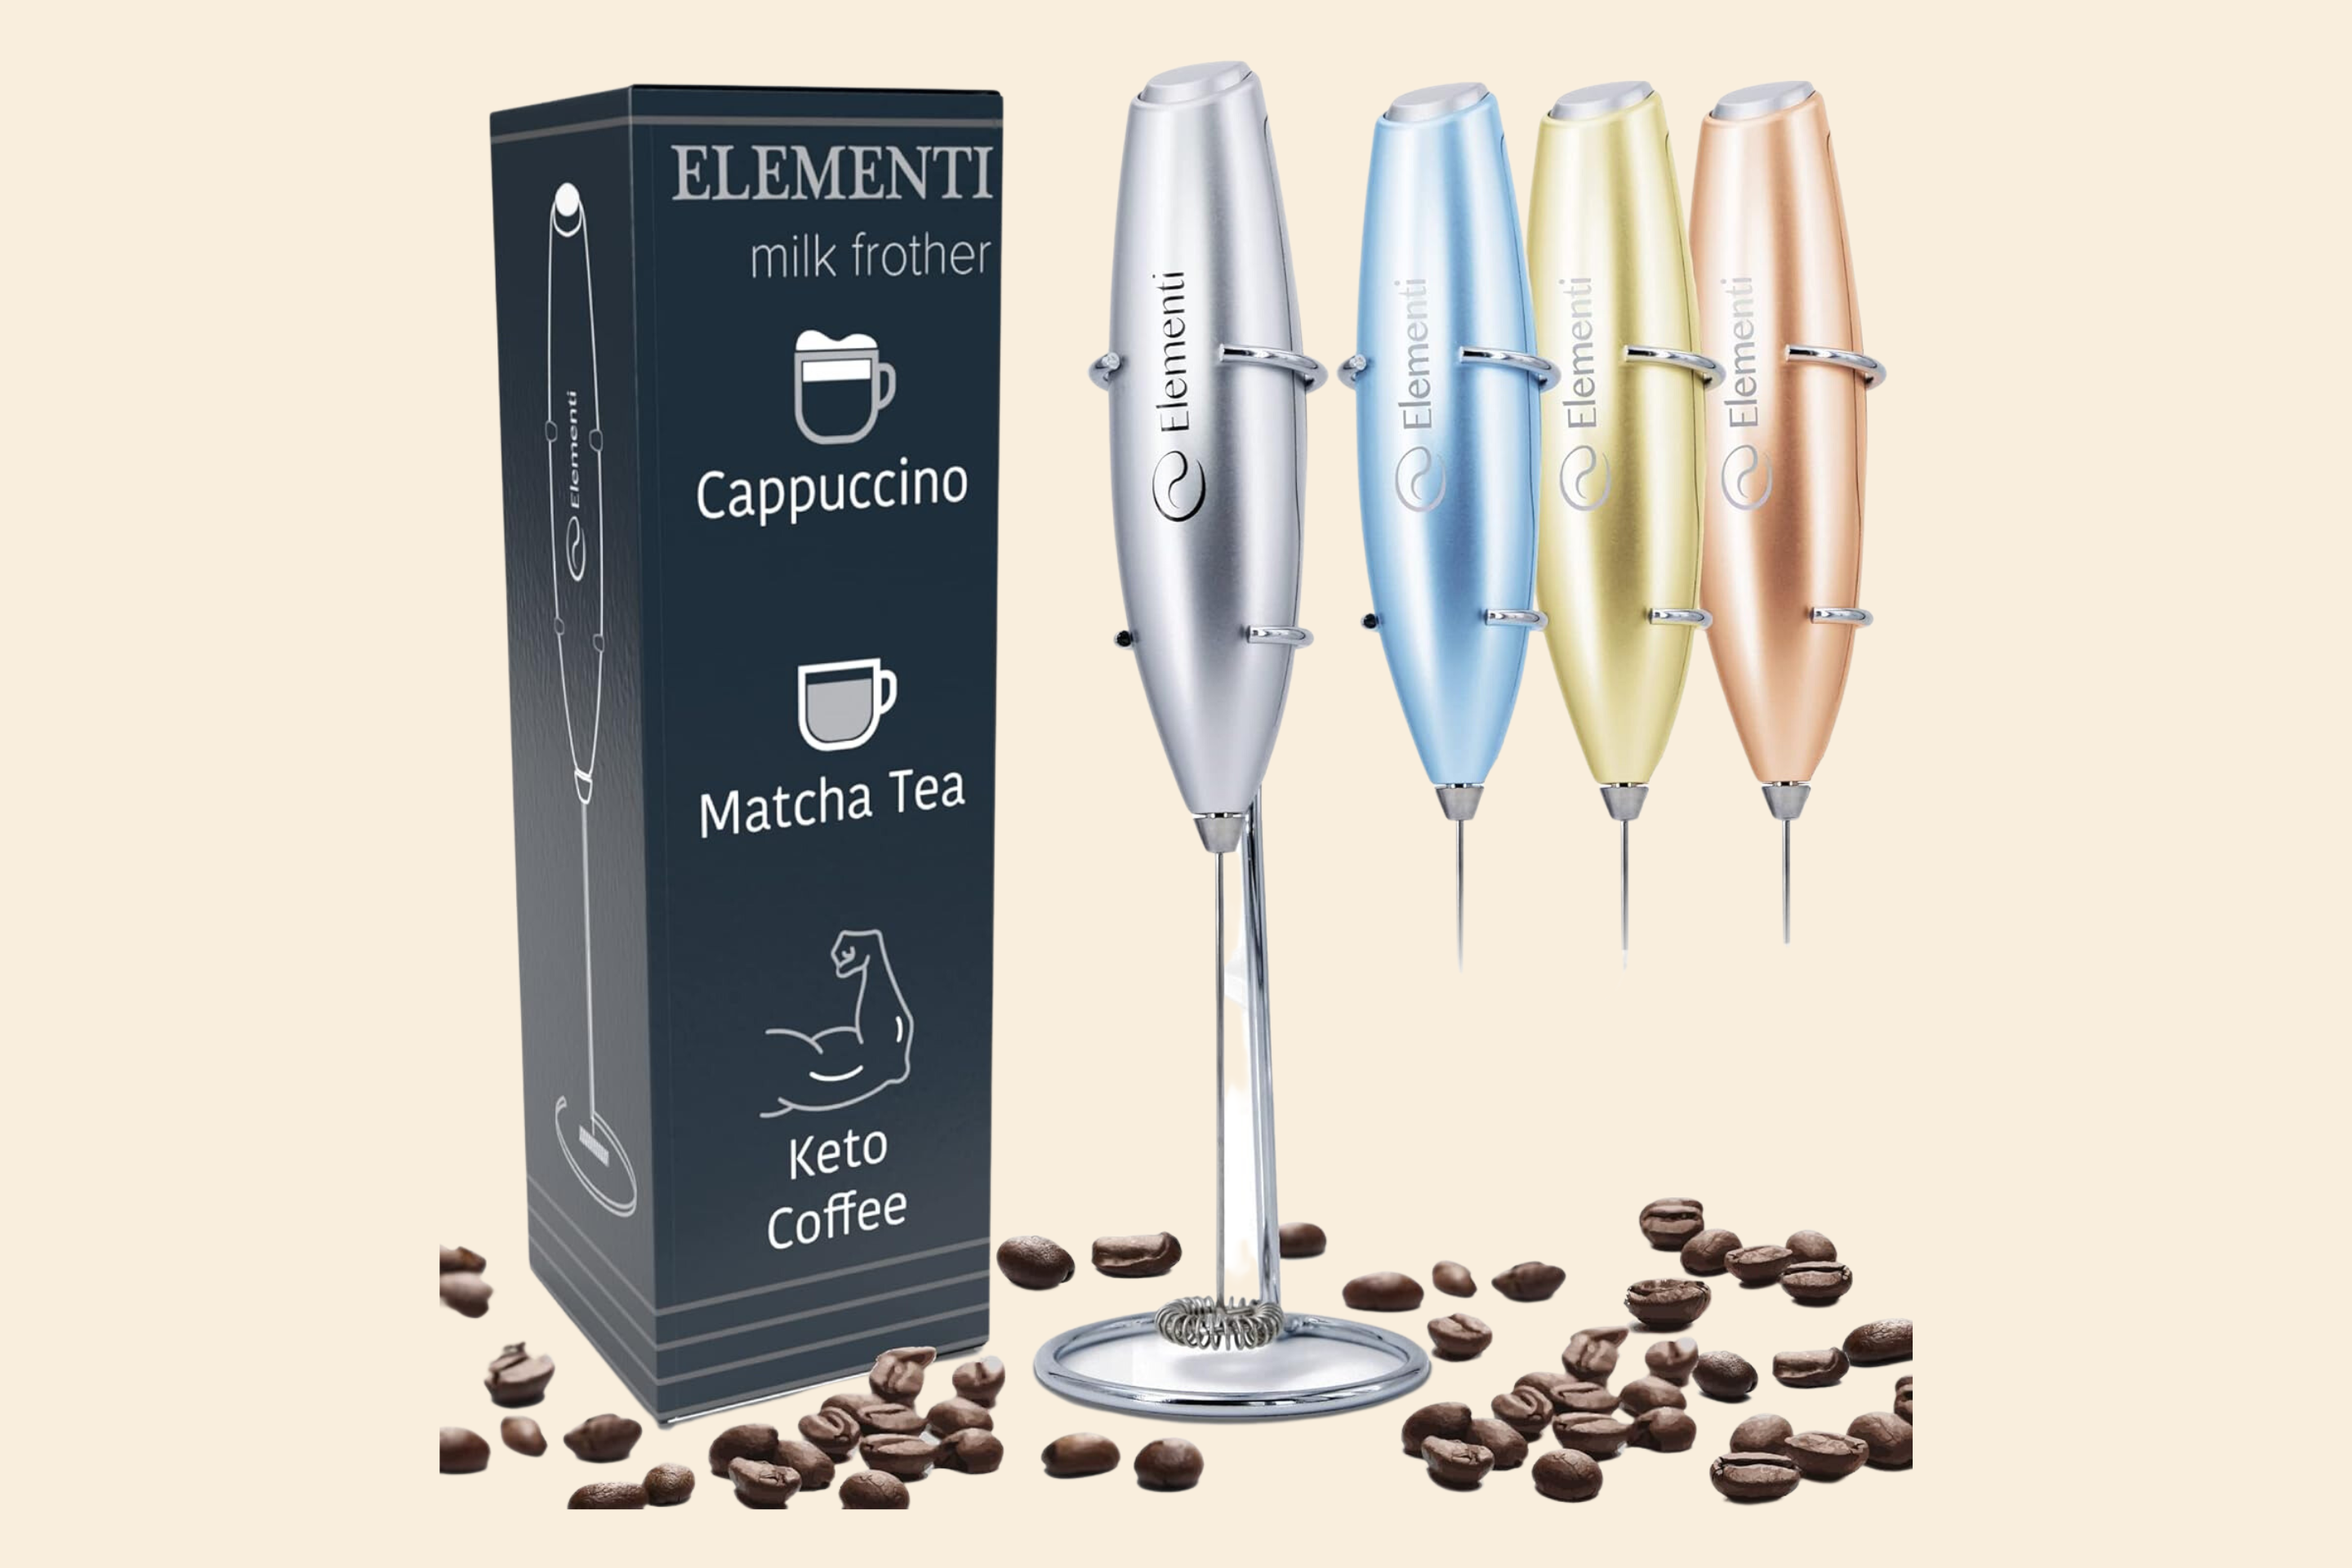 https://img.money.com/2022/12/shopping-elementi-milk-frother.png